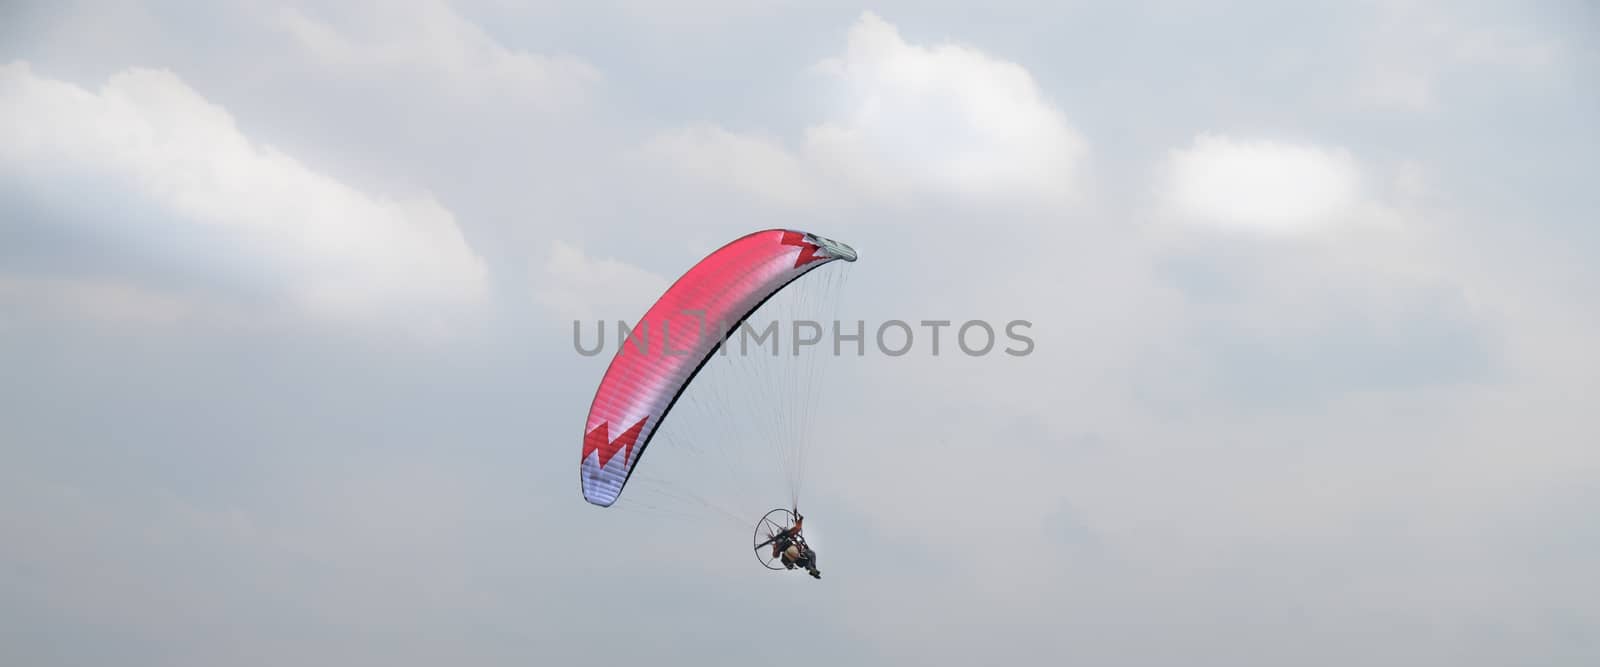 motorized paraglider flying in the sky by Isaac74